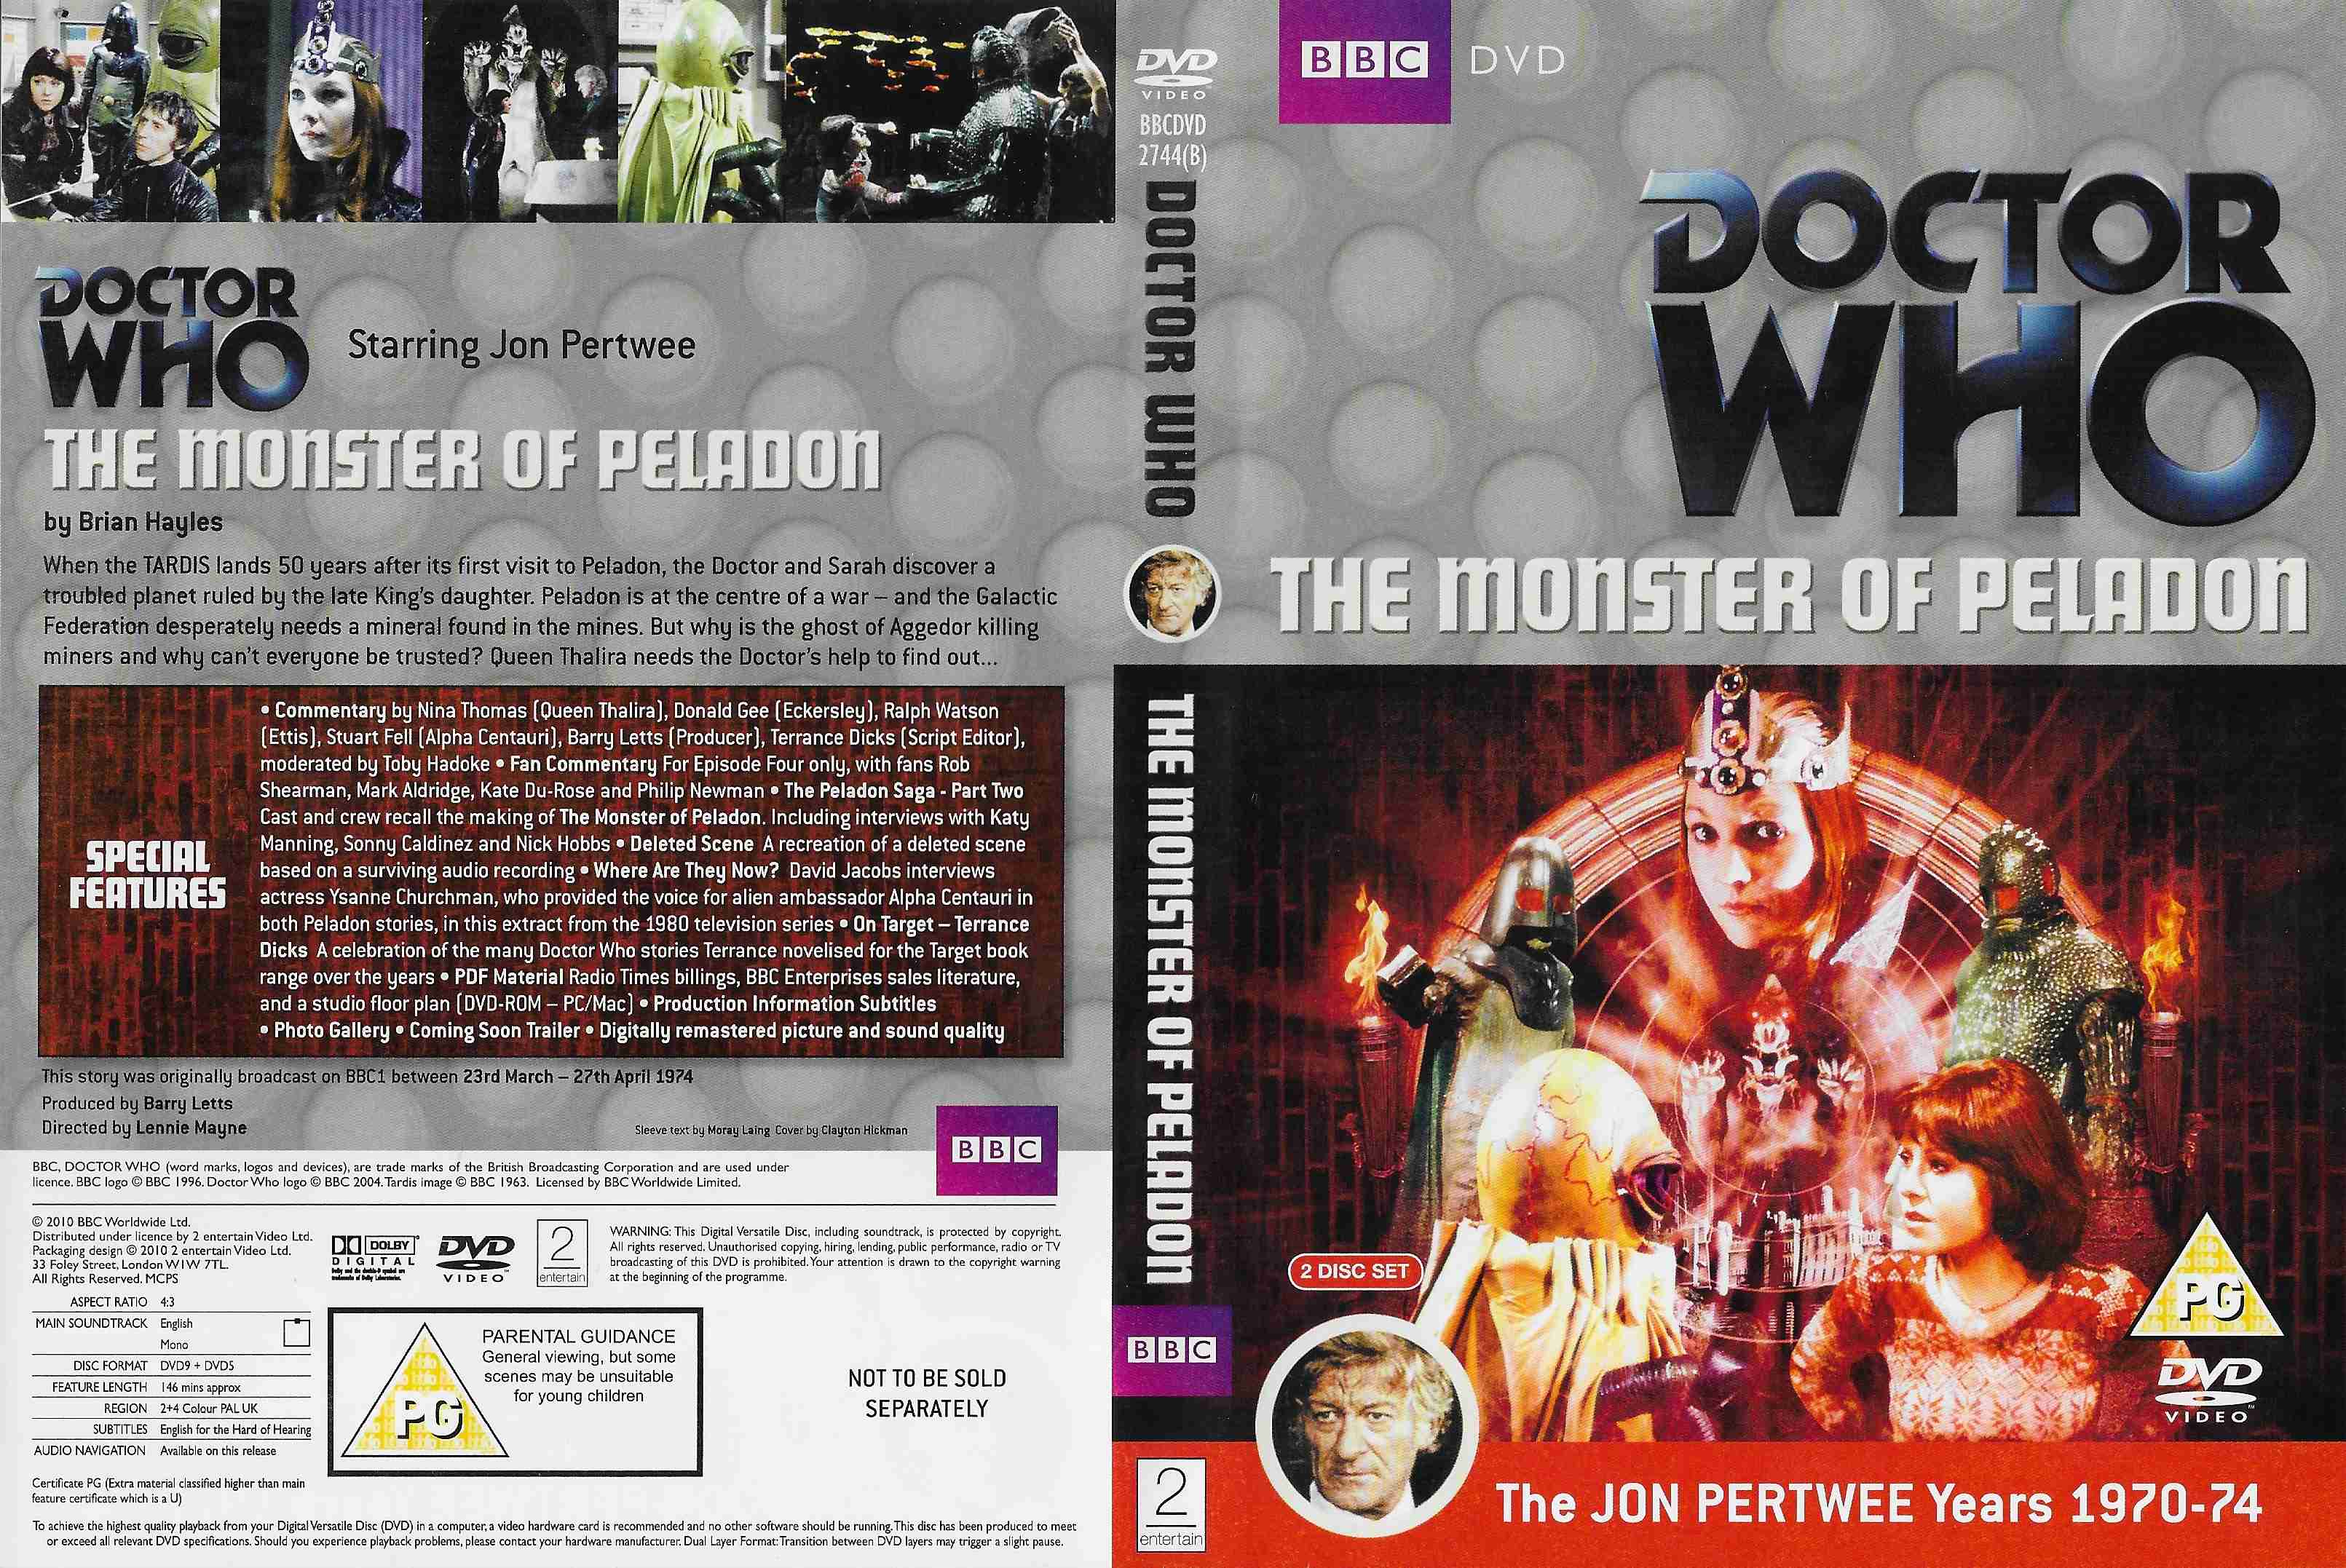 Picture of BBCDVD 2744B Doctor Who - The Monster of Peladon by artist Brian Hayles from the BBC records and Tapes library